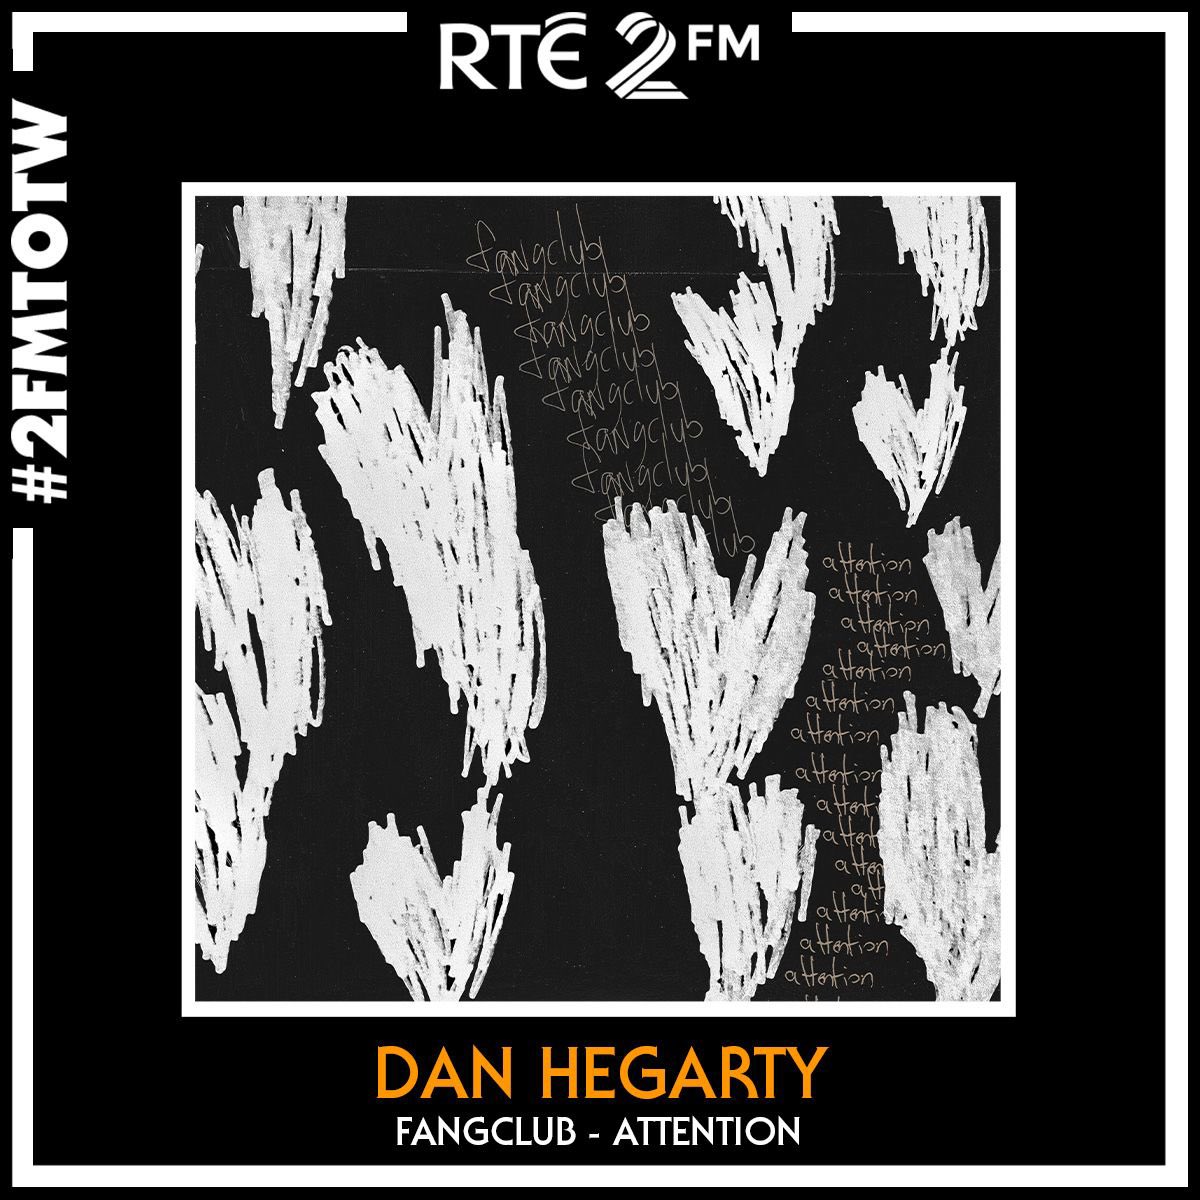 Amidst the wind & the rain, you may be able to hear these on @RTE2fm tonight from 11pm 🌧️

@carolineplz, @Jainmusic, @NewDad, @laurenann_music, @thecure, @qbanaamusic, @KNEECAPCEOL, @MOMOMOYOUTH, @garbage, @Spearsideband, & my #2FMTOTW by @fangclub